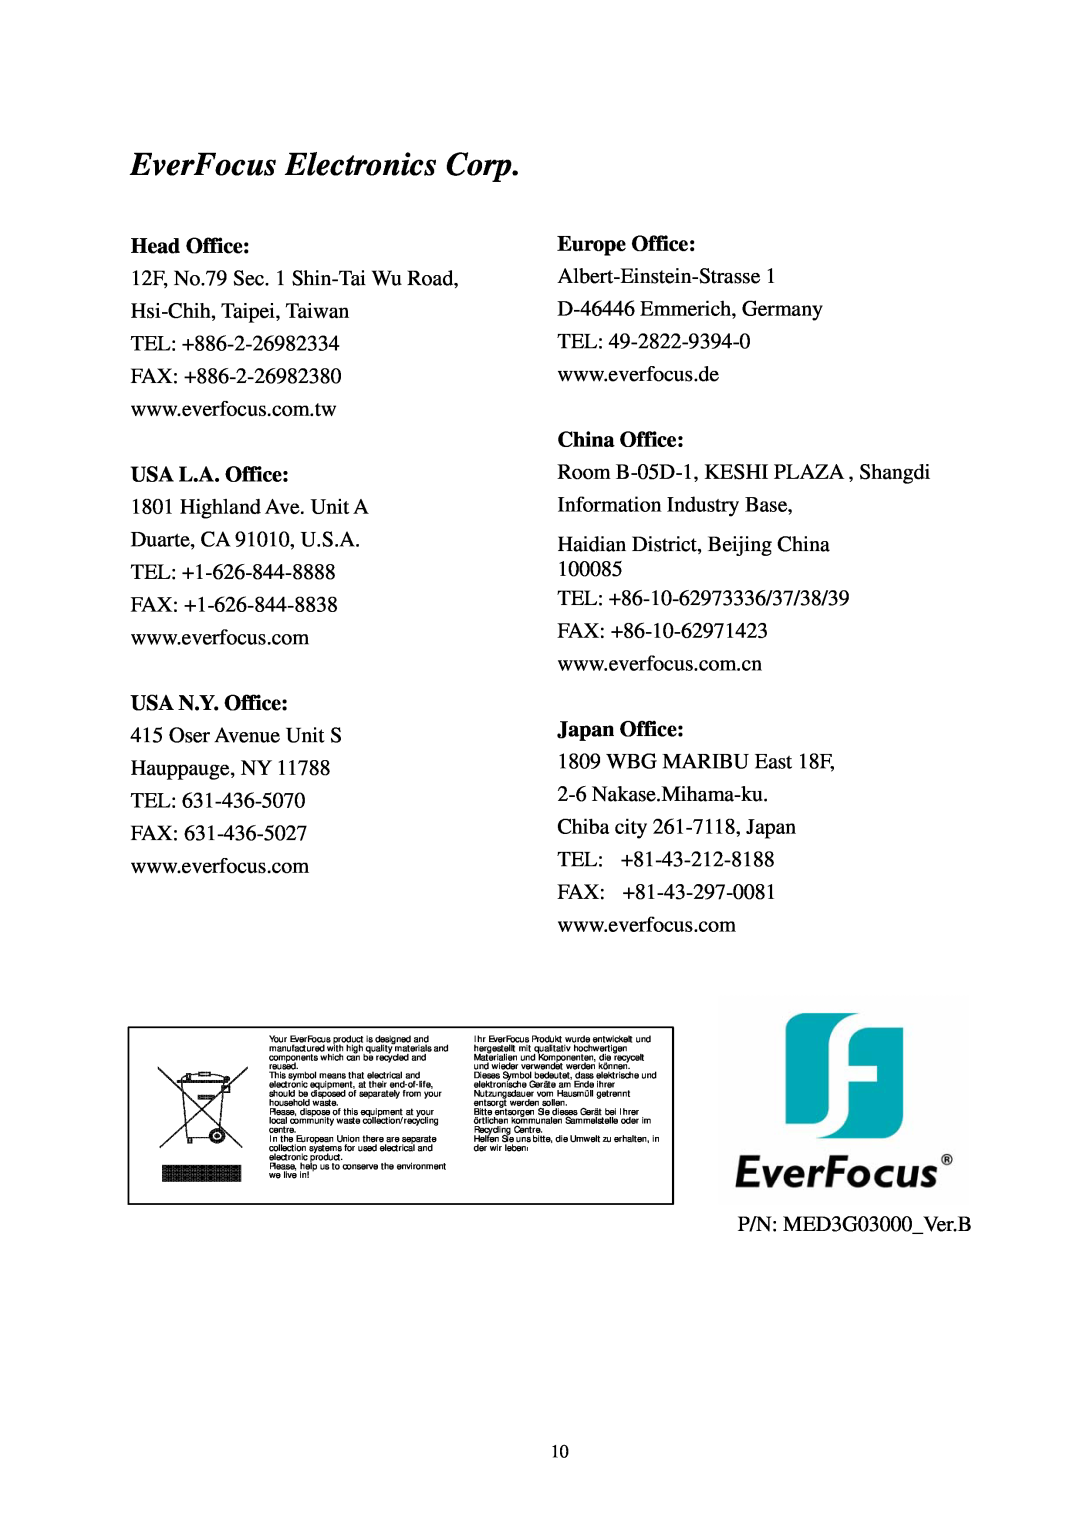 EverFocus Eq250, EQ350 Head Office, USA L.A. Office, USA N.Y. Office, Europe Office, China Office, Japan Office 